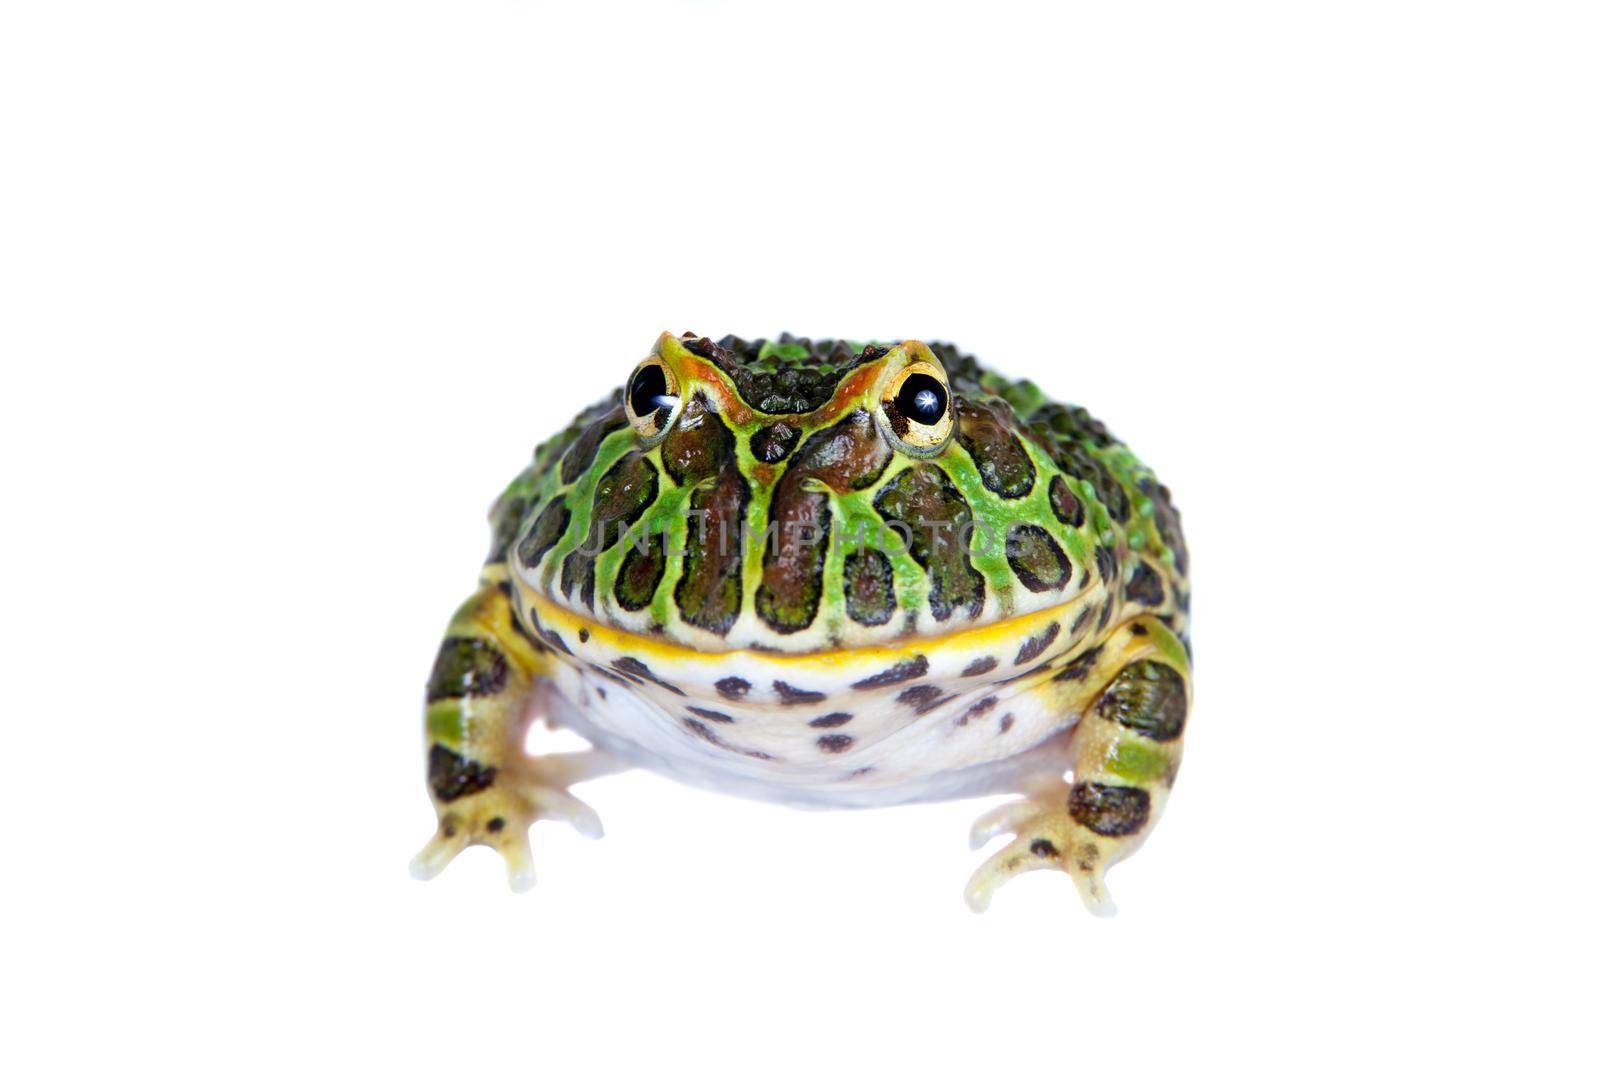 The Argentine horned froglet, Ceratophrys ornata, isolated on white background